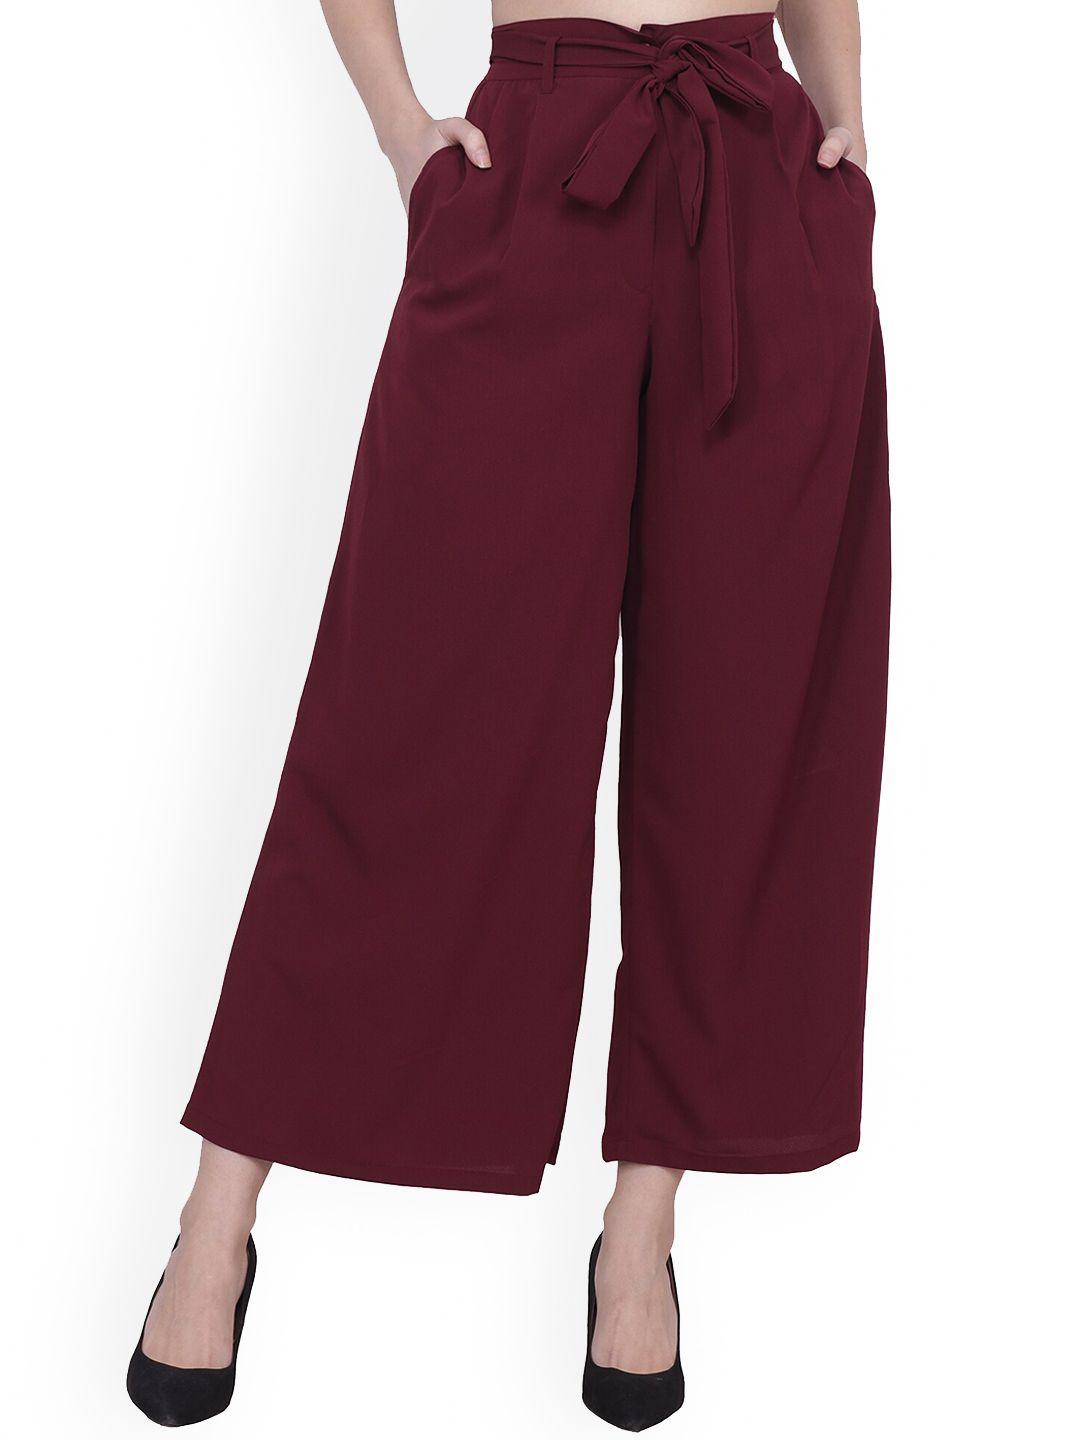 frempy women maroon original solid crepe culottes trousers